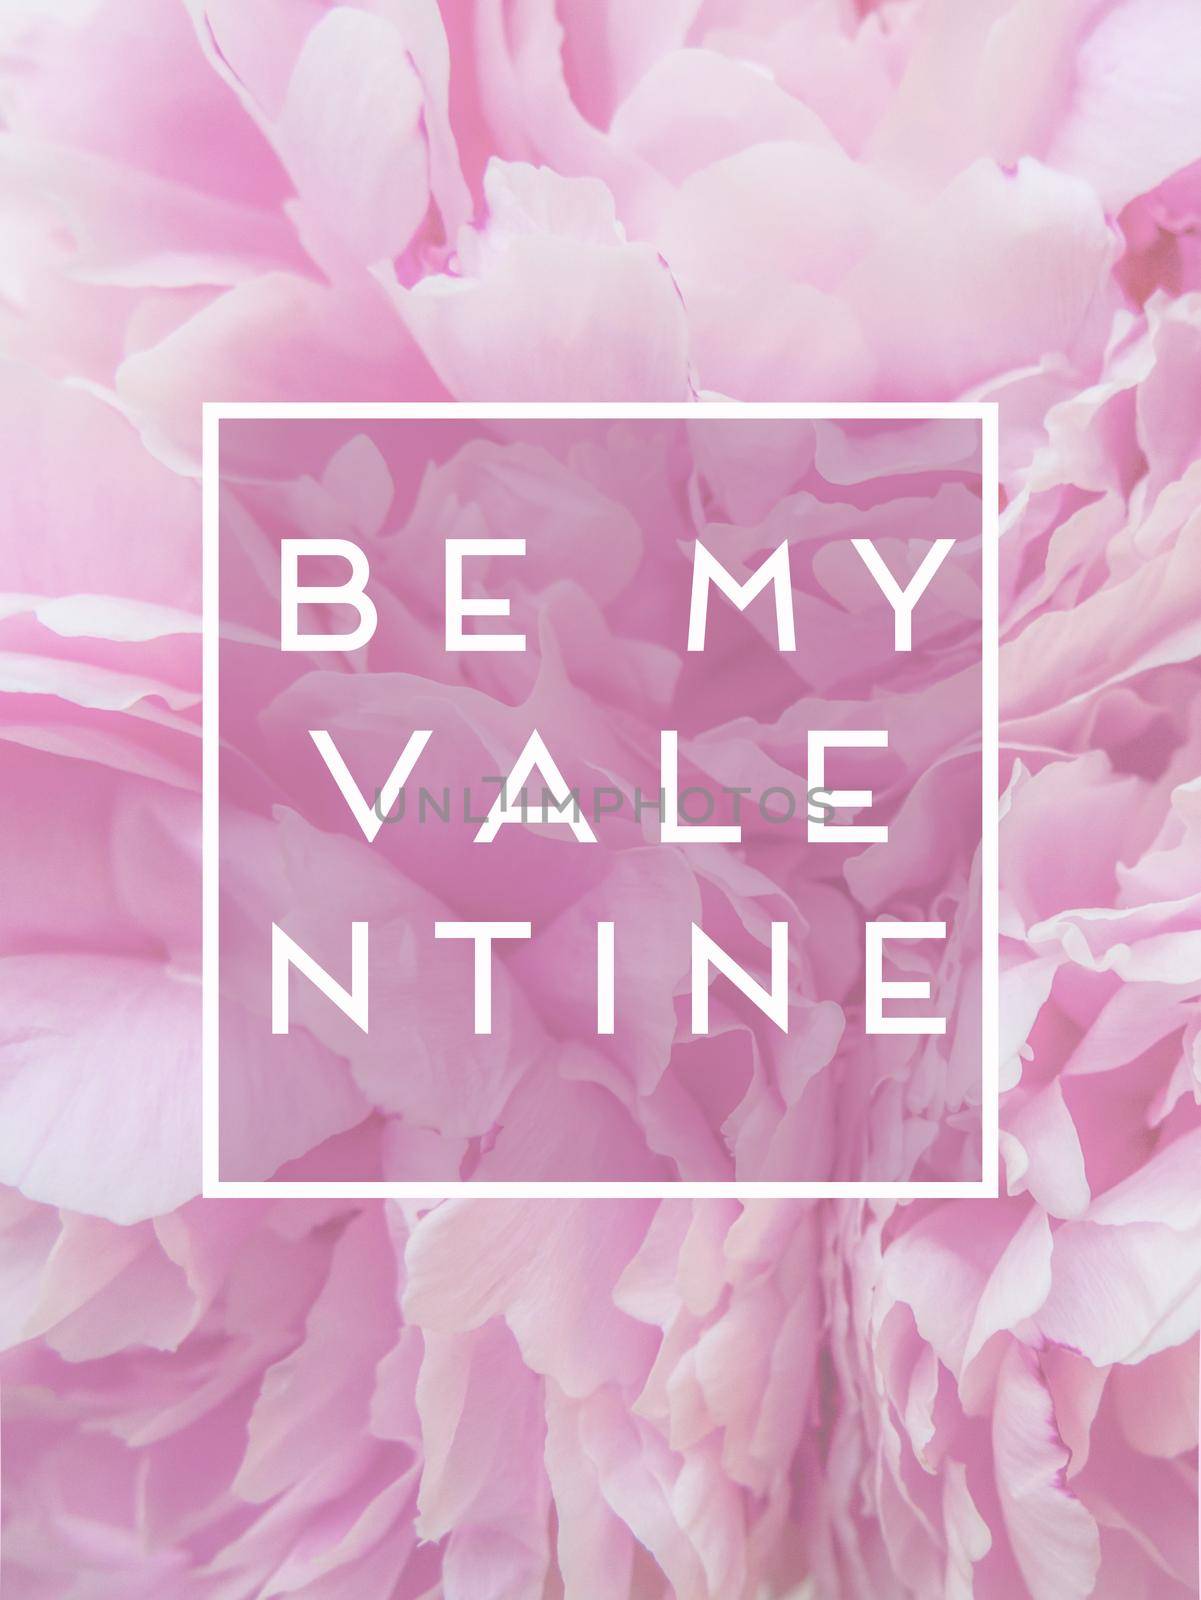 text be my valentine in the frame against the background of pink peonies flowers. postcard by Andre1ns